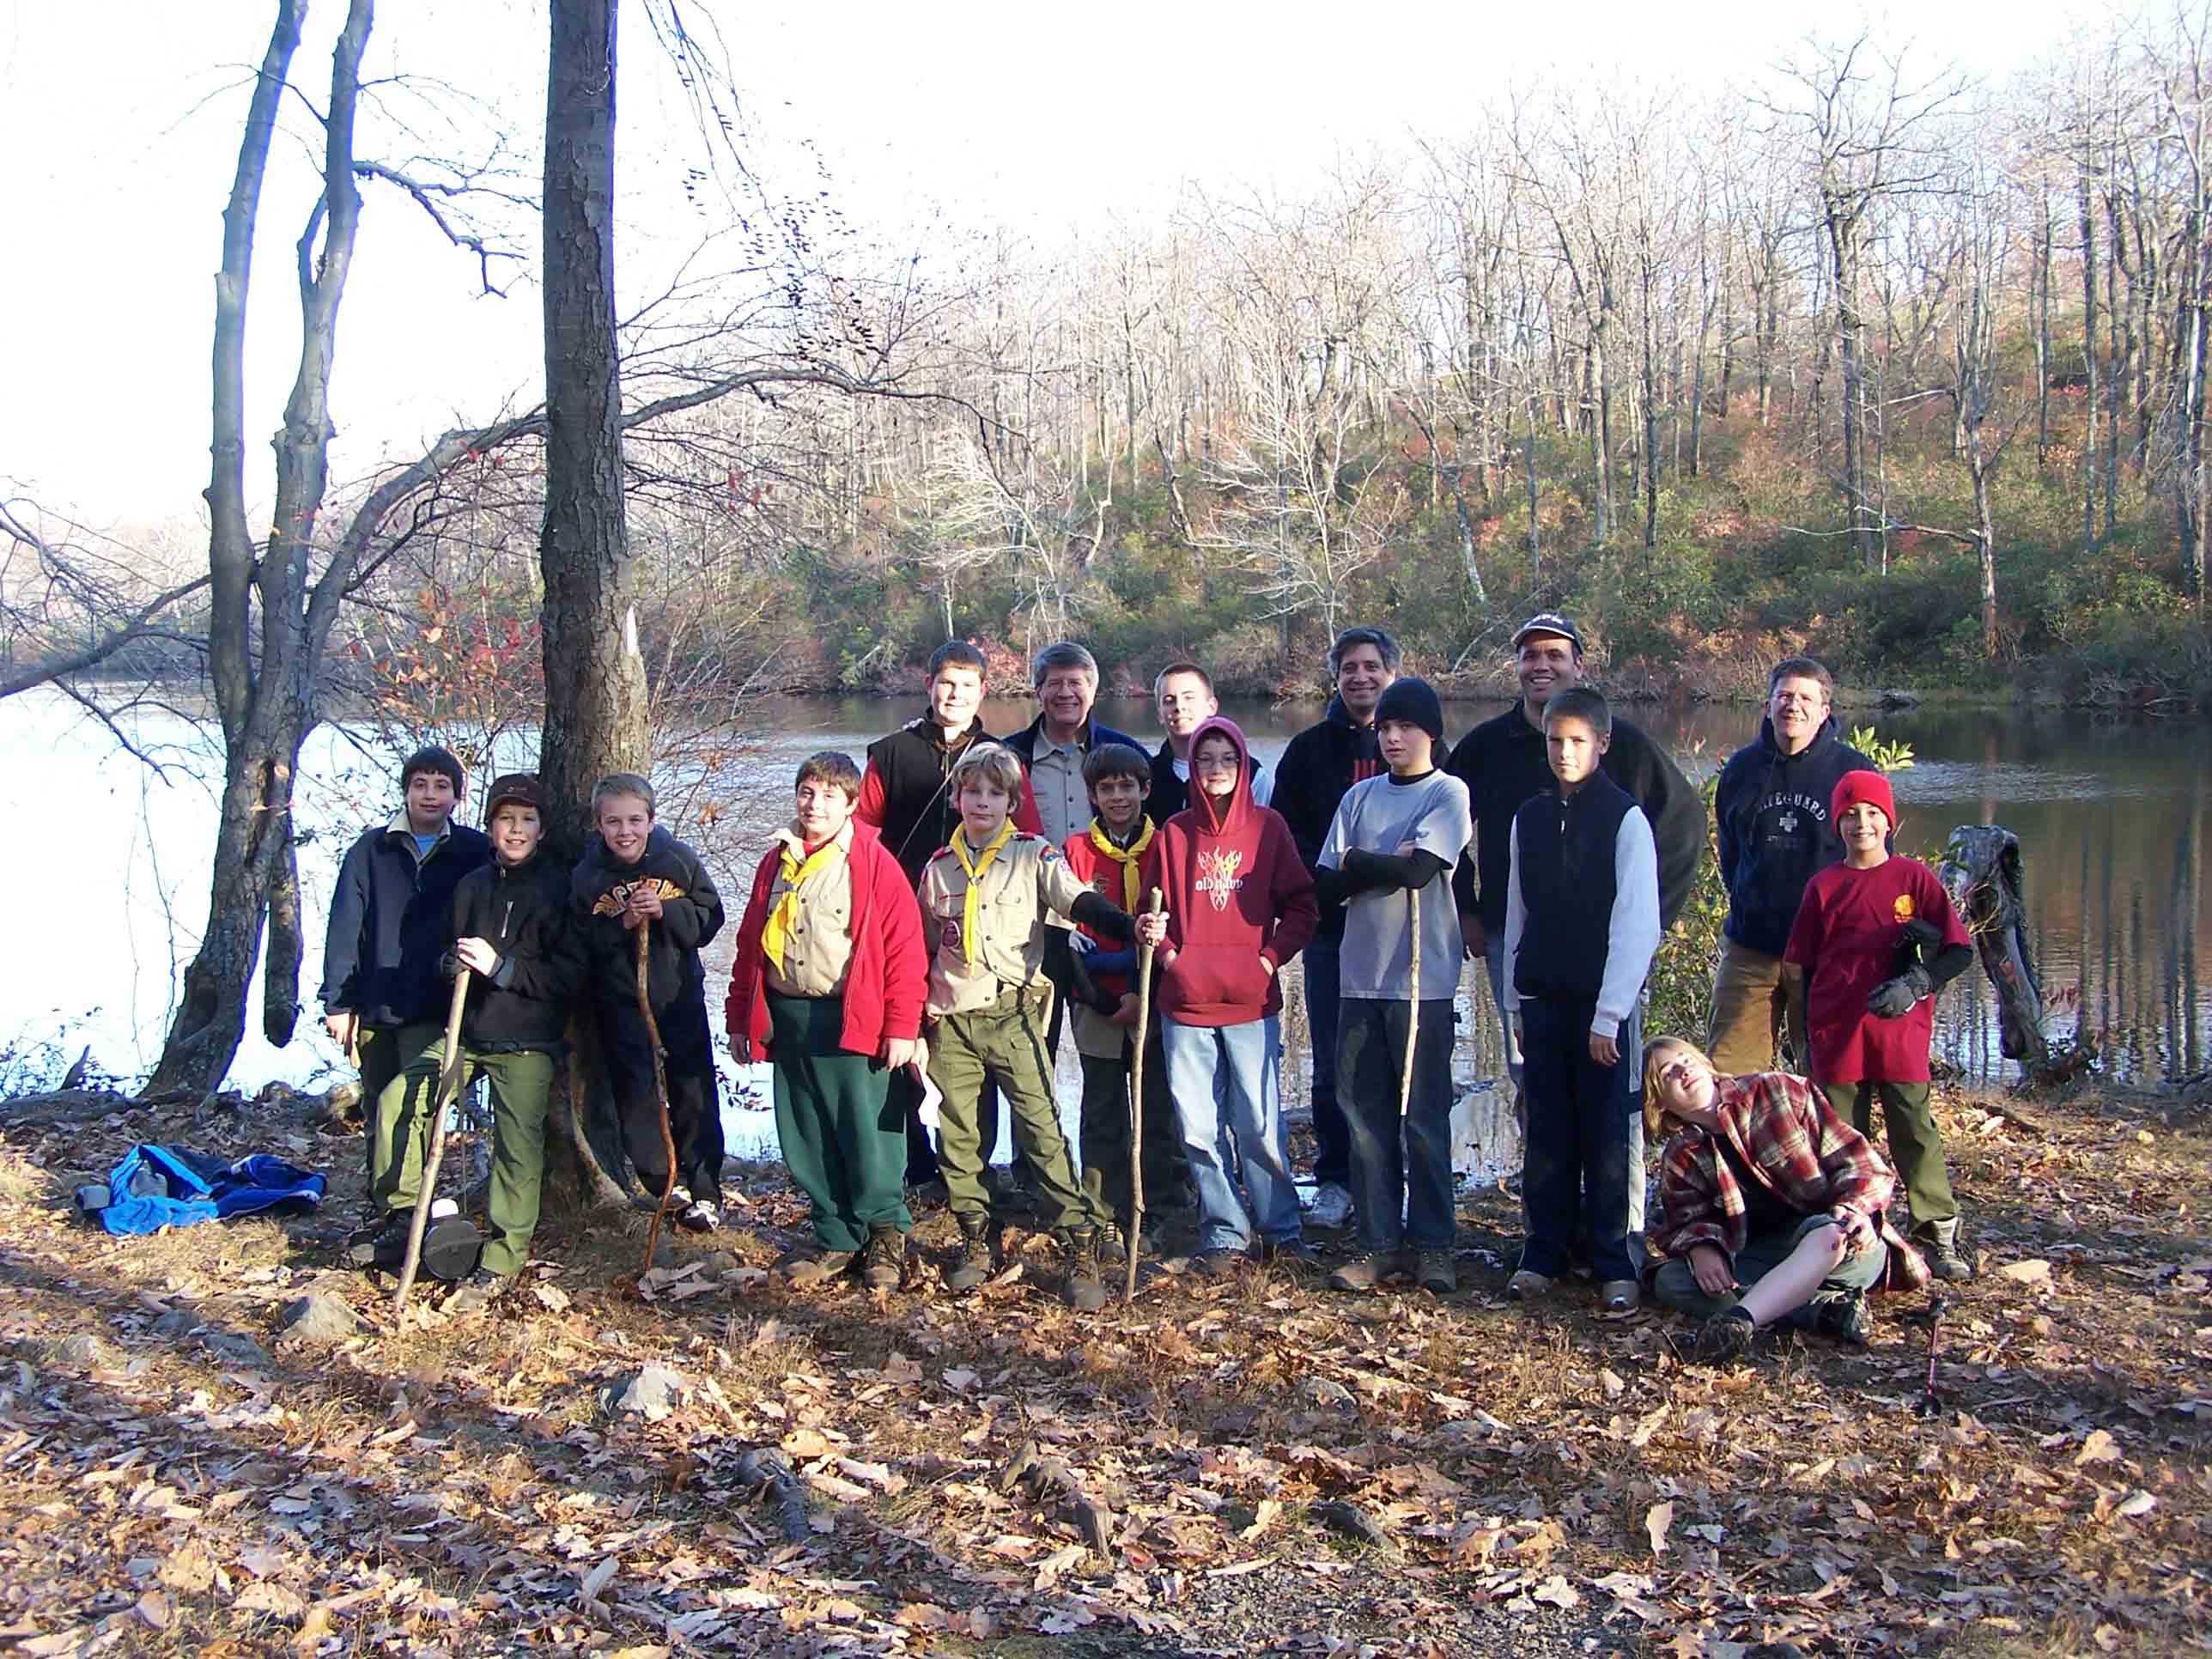 mm 8.5 Boy Scout troop 54 Hohokus, NJ. Courtesy at@rohland.org